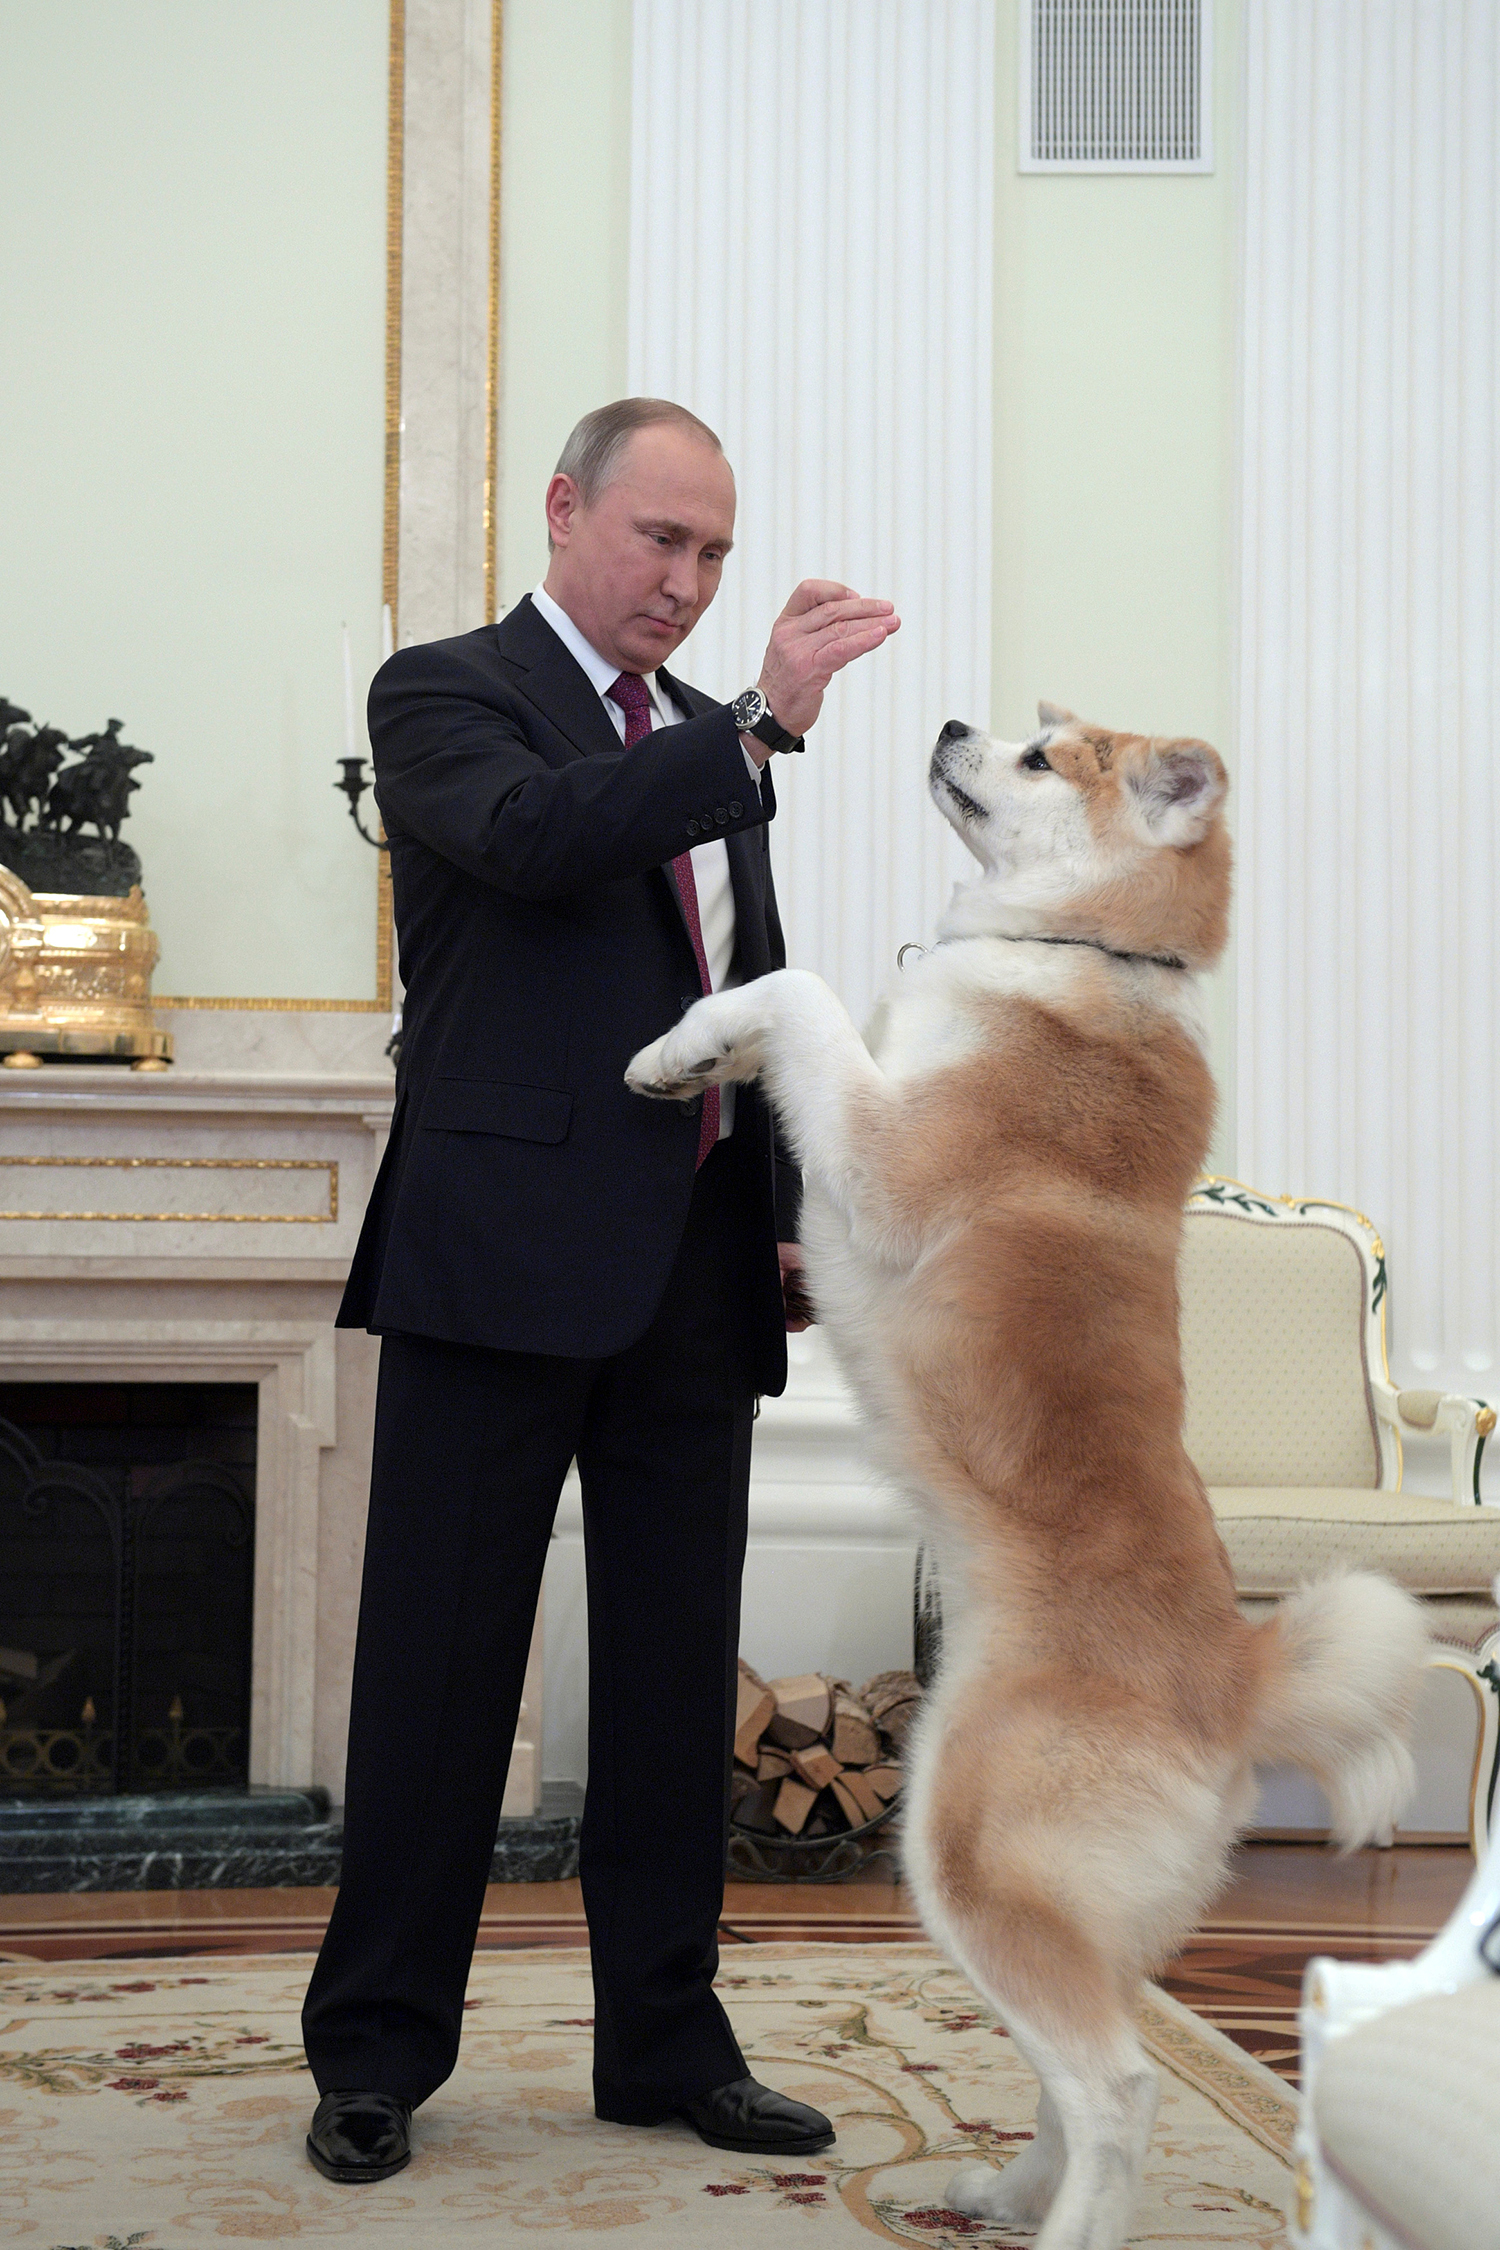 MOSCOW 2016-12-13 Russian President Vladimir Putin plays with his dog Yume, a female Akita Inu, before giving an interview to Japanese Nippon Television and Yomiuri newspaper at the Kremlin in Moscow, Russia, December 7, 2016. Picture taken December 7, 2016. Sputnik/Kremlin/Alexei Druzhinin via REUTERS ATTENTION EDITORS - THIS IMAGE WAS PROVIDED BY A THIRD PARTY. EDITORIAL USE ONLY. TPX IMAGES OF THE DAY Photo: / REUTERS / TT / kod 72000